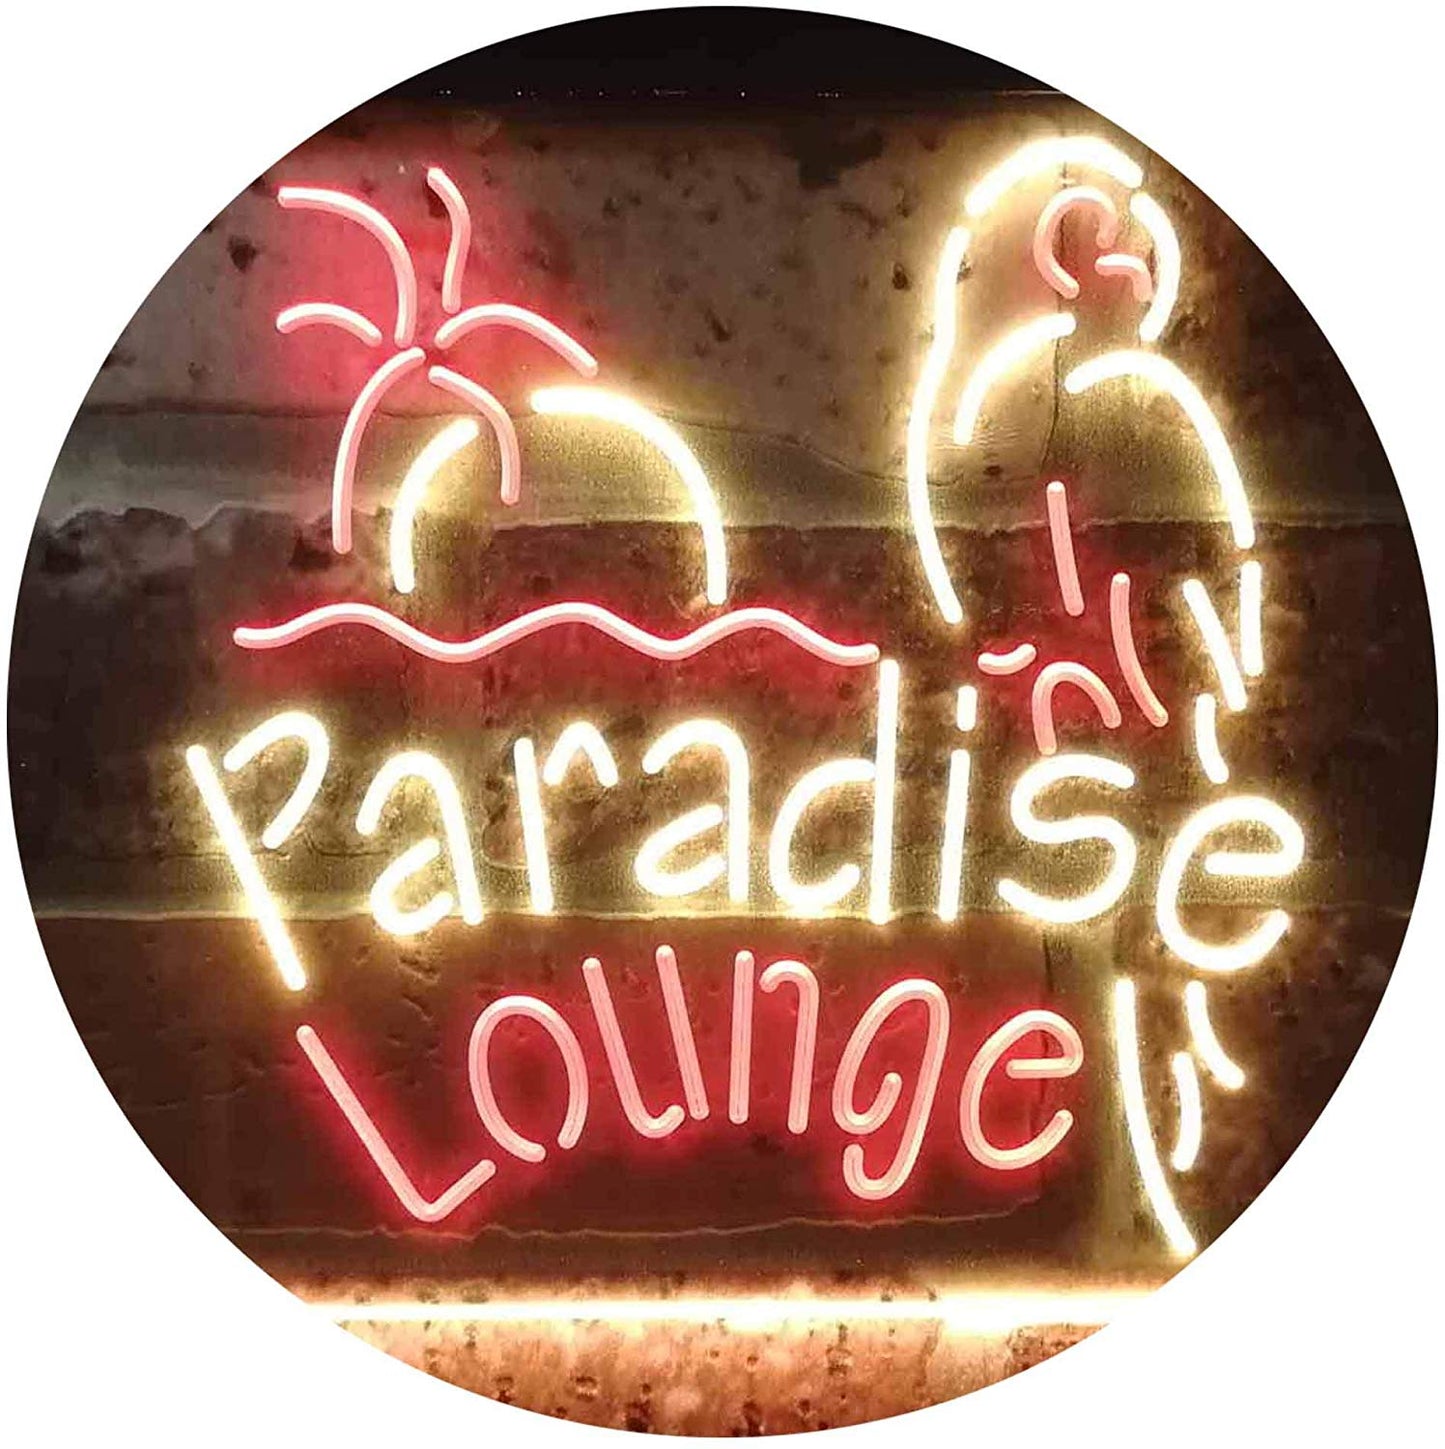 Parrot Paradise Lounge Bar LED Neon Light Sign - Way Up Gifts